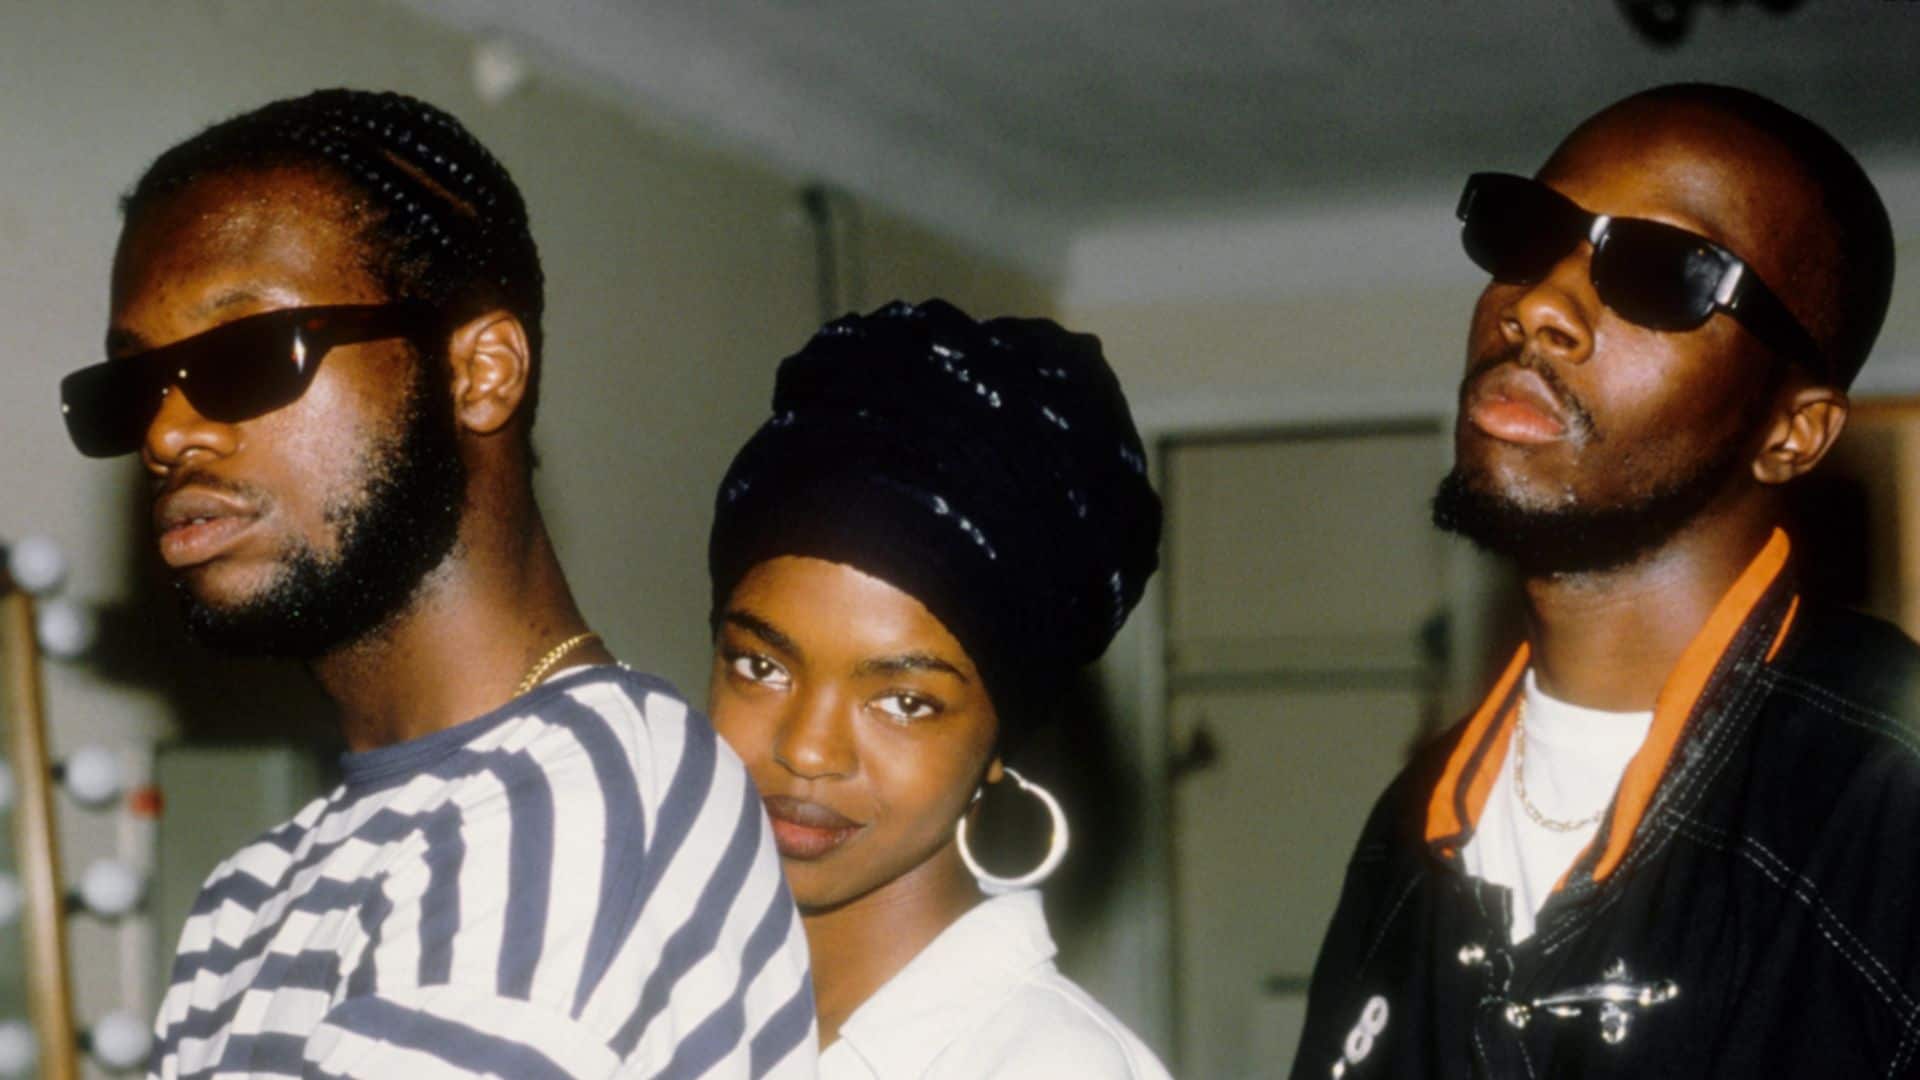 The Fugees band